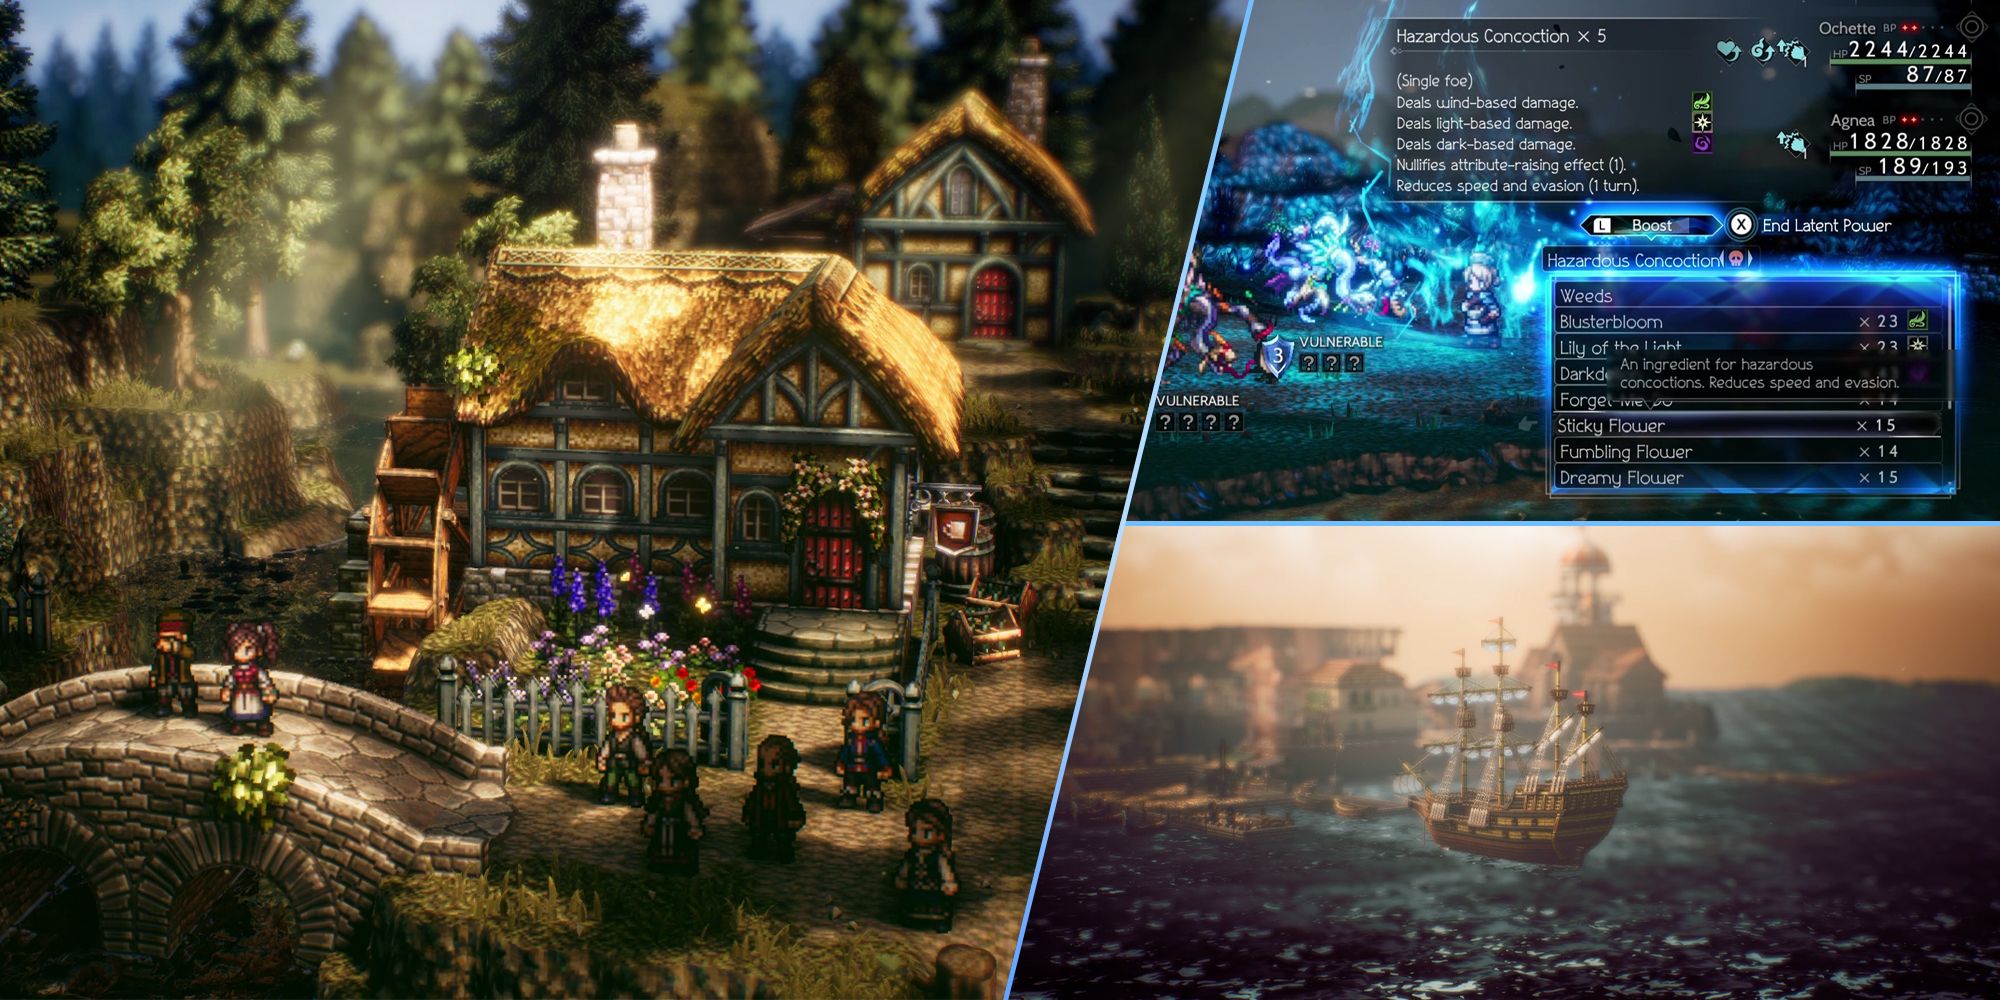 Octopath Traveler 2: All Latent Powers, Ranked